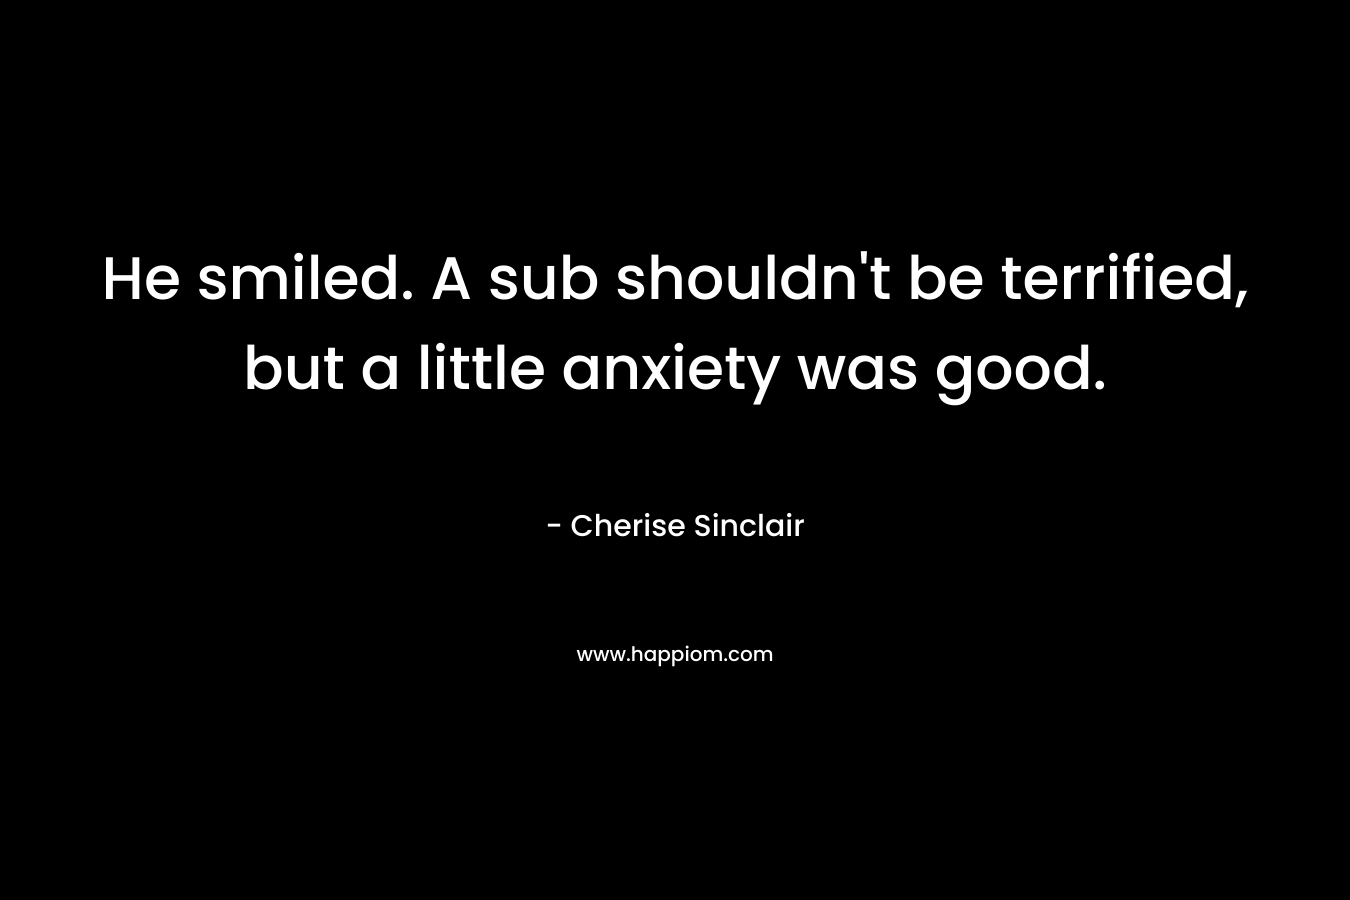 He smiled. A sub shouldn't be terrified, but a little anxiety was good.